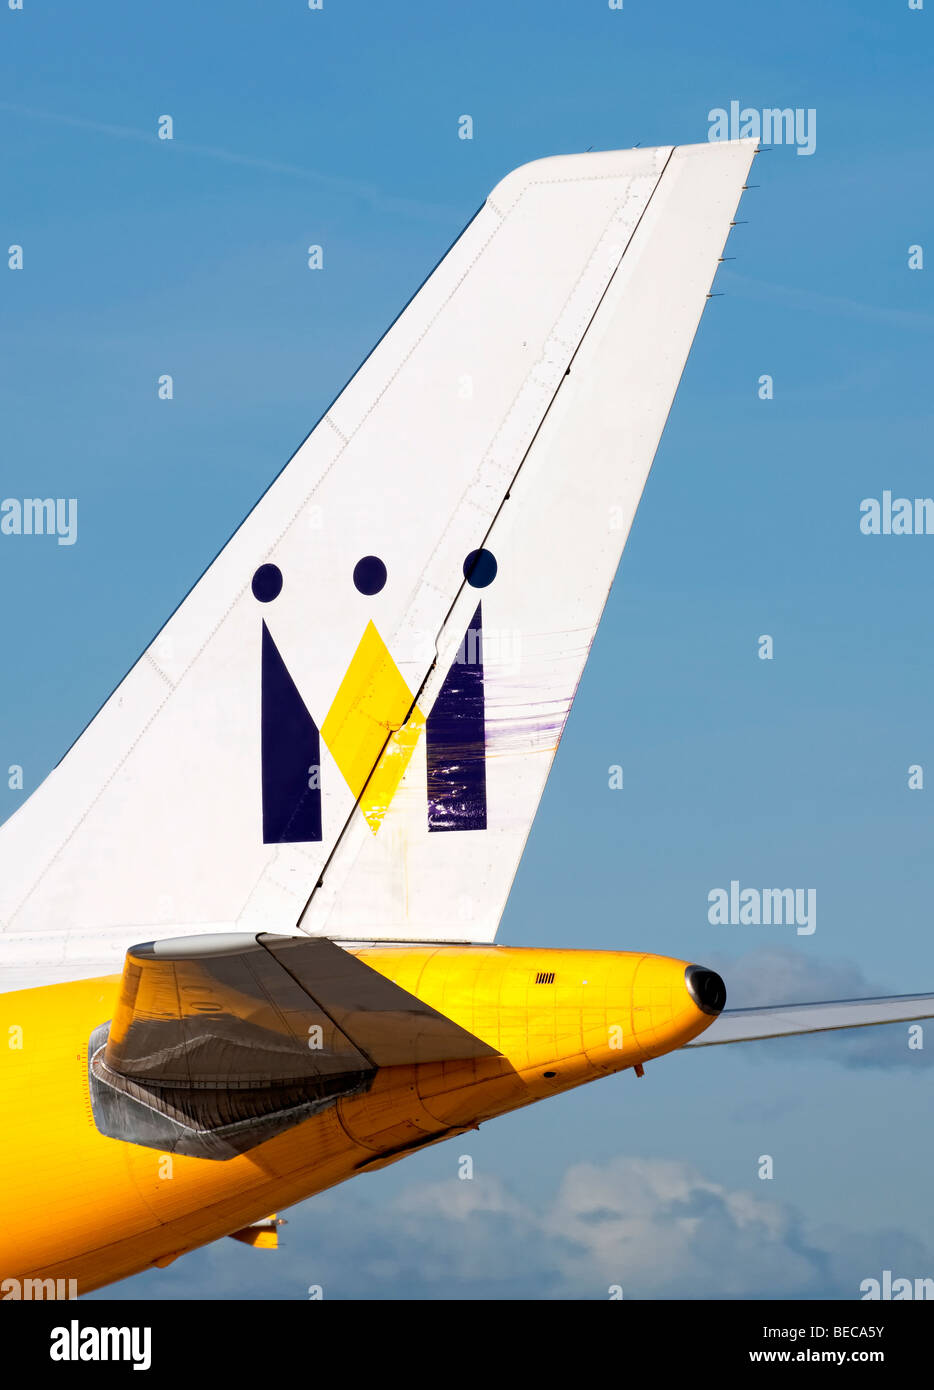 Tail fin of a Monarch aircraft as it taxis for take off from Manchester Airport (Ringway Airport) in Manchester, England Stock Photo